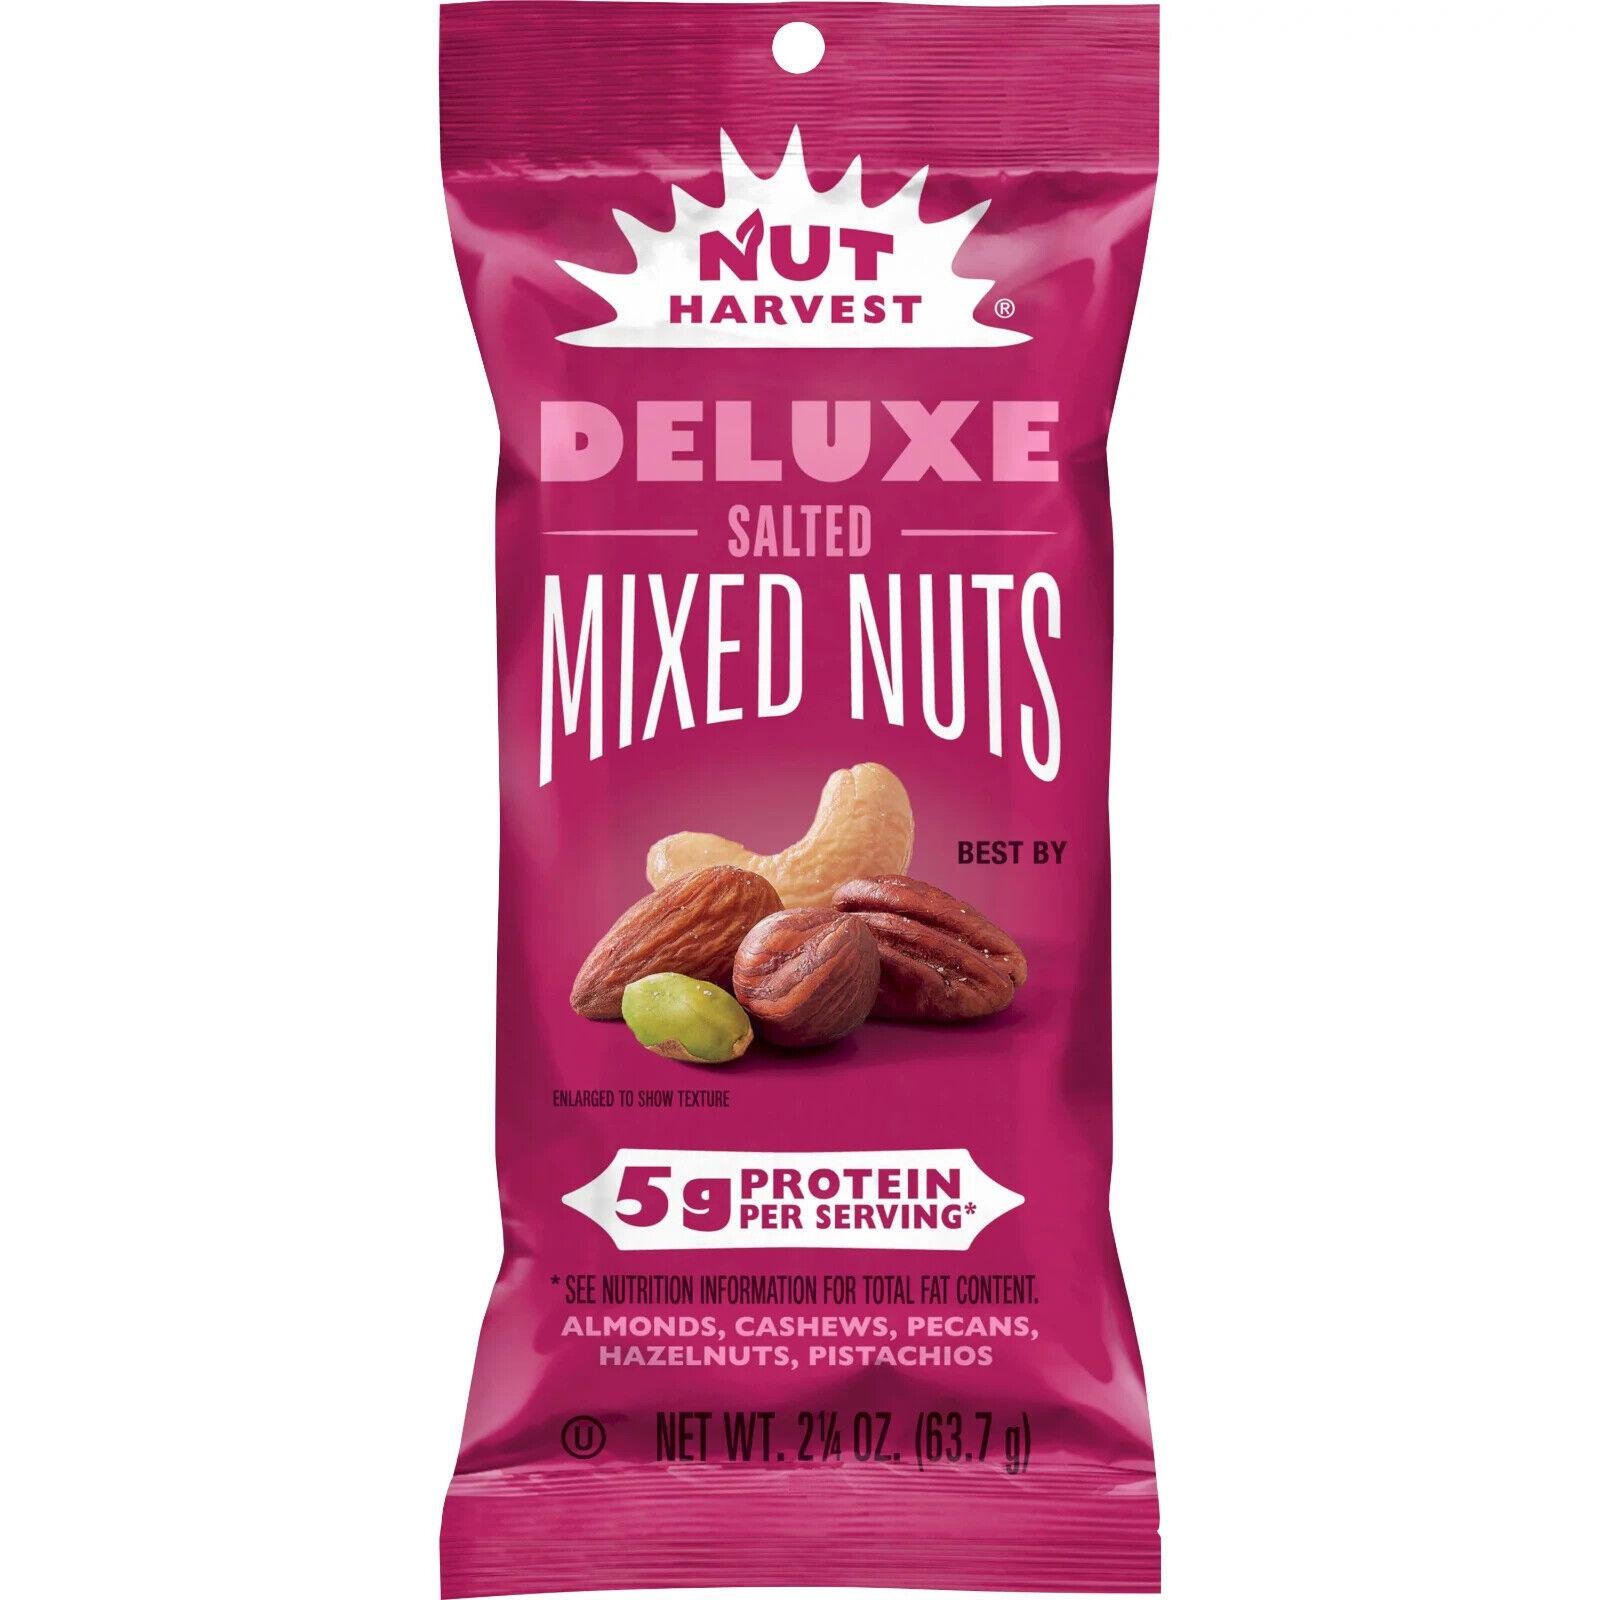 Nut Harvest Mixed Nuts